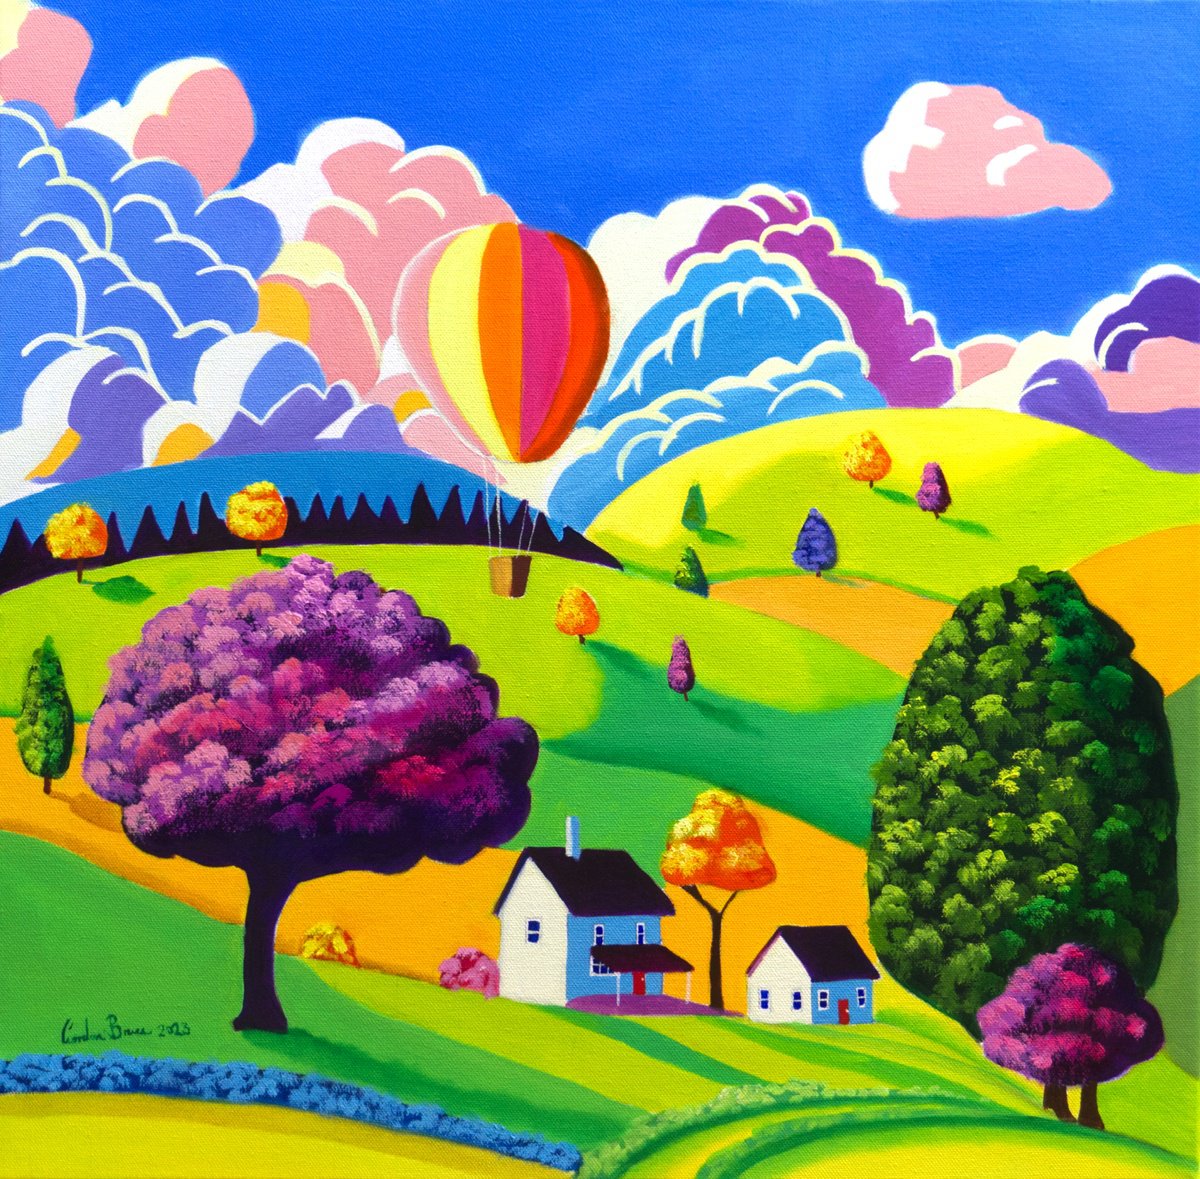 Summer day naive art painting by Gordon Bruce